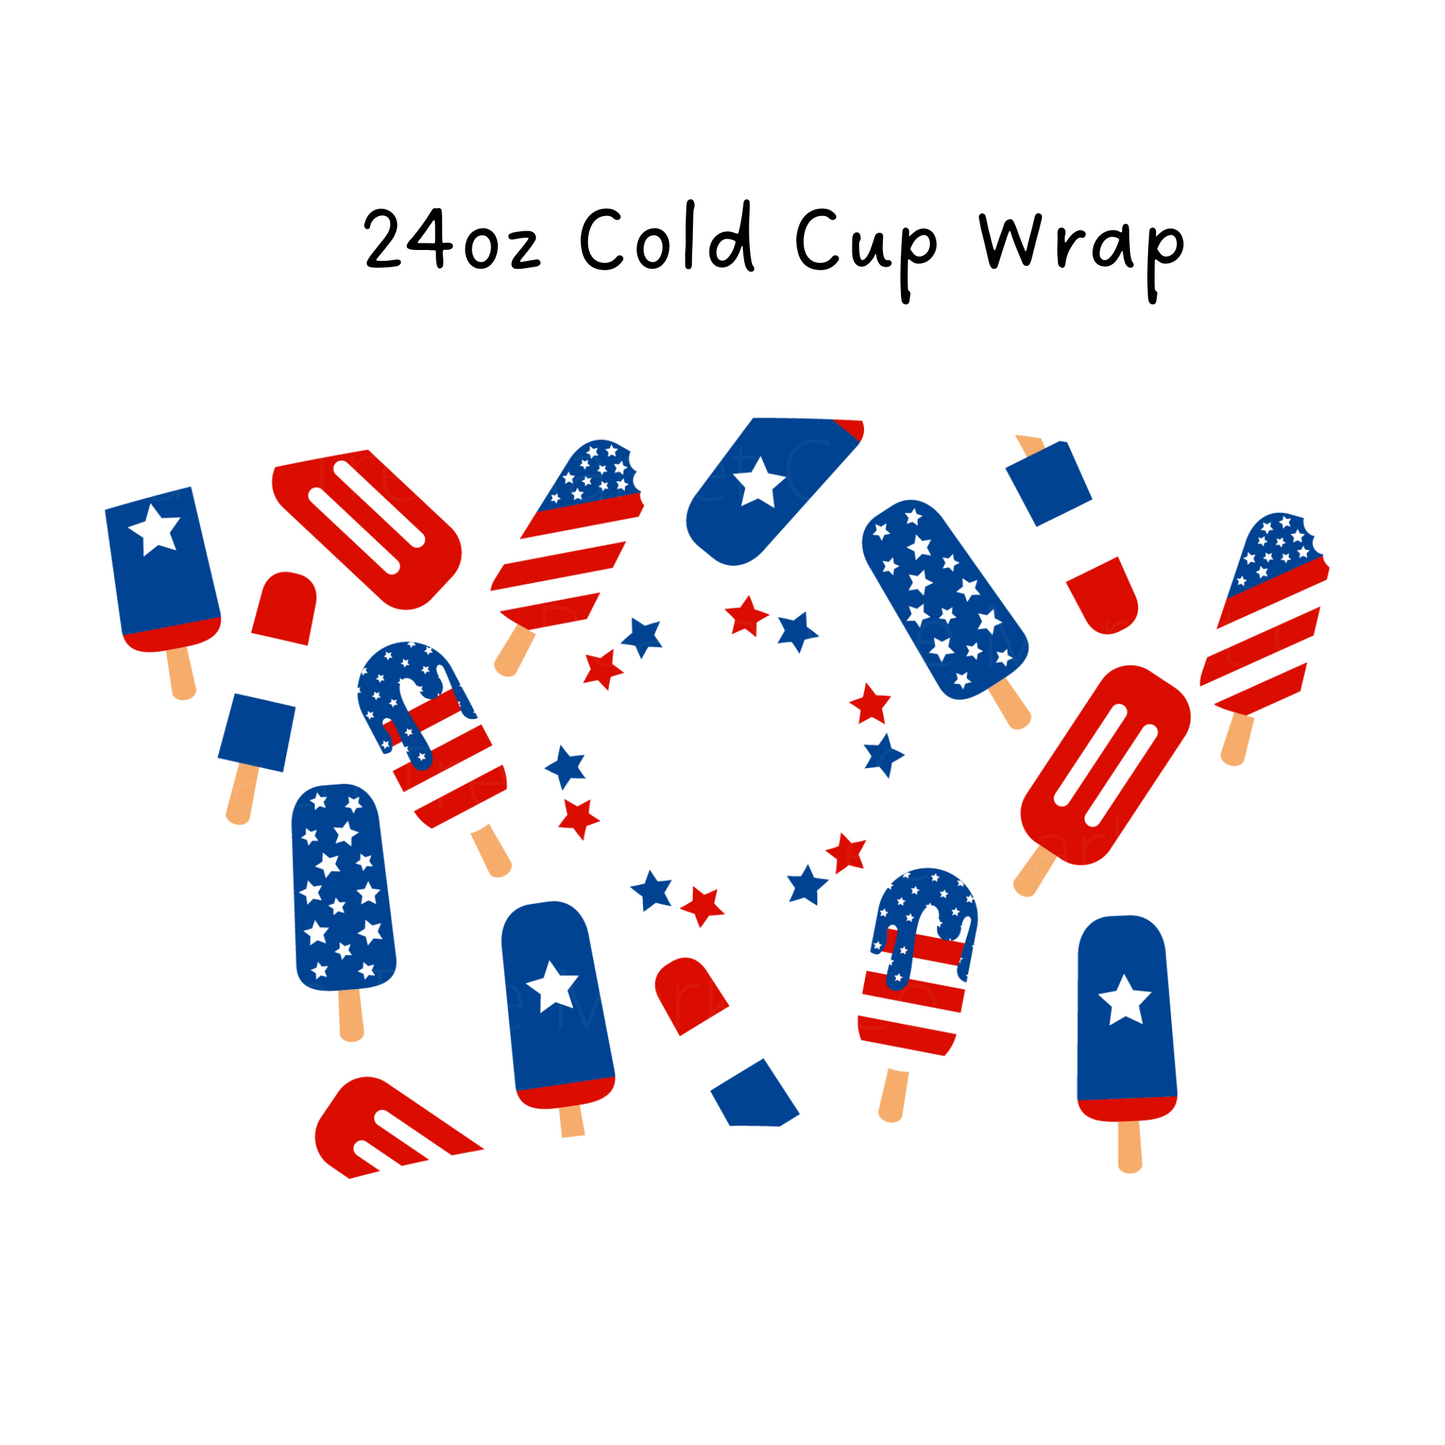 Red White and Blue Popsicles 24 OZ Cold Cup Wrap